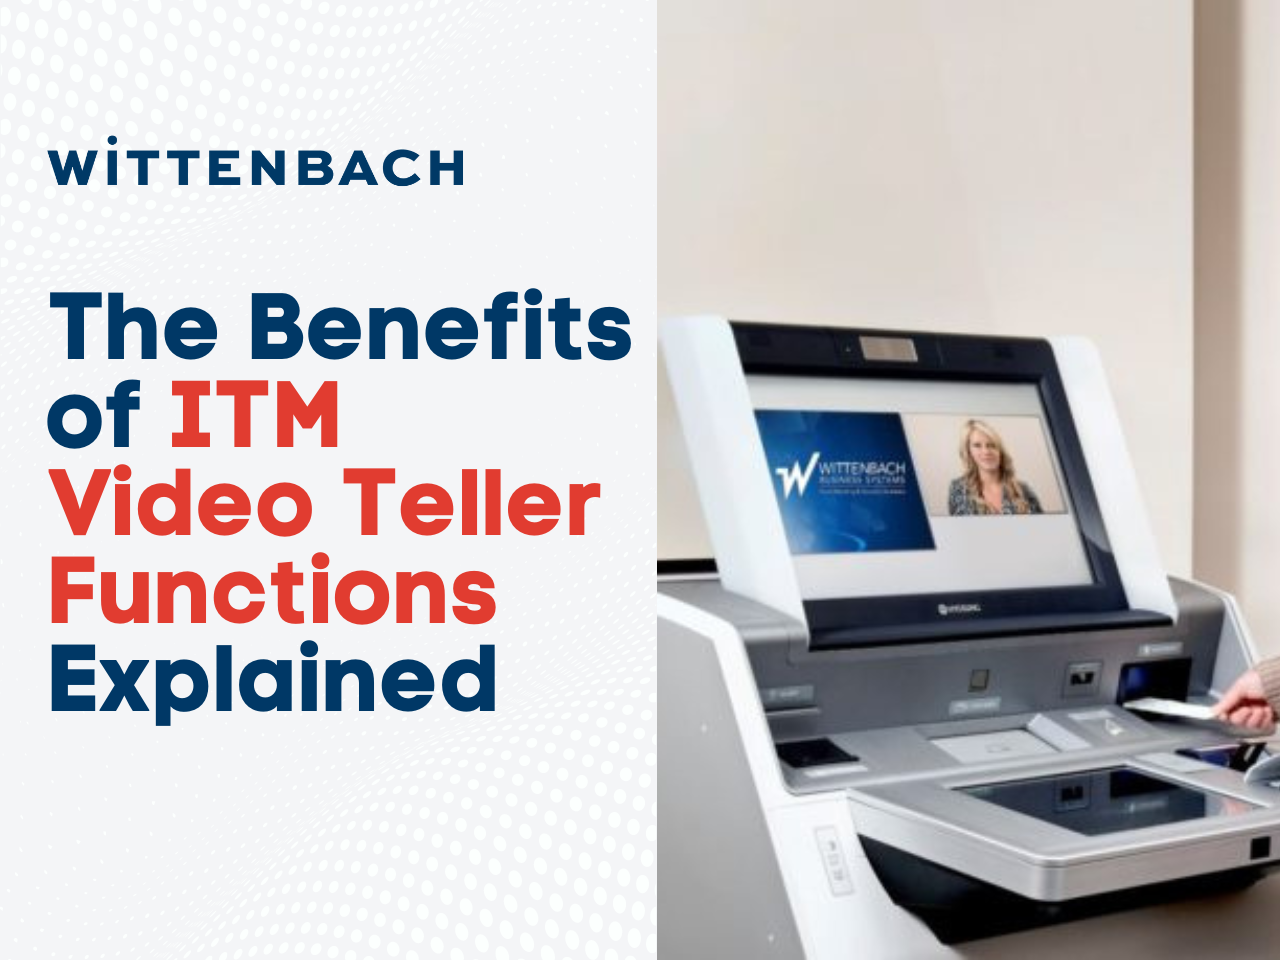 The Benefits of ITM Video Teller Functions Explained